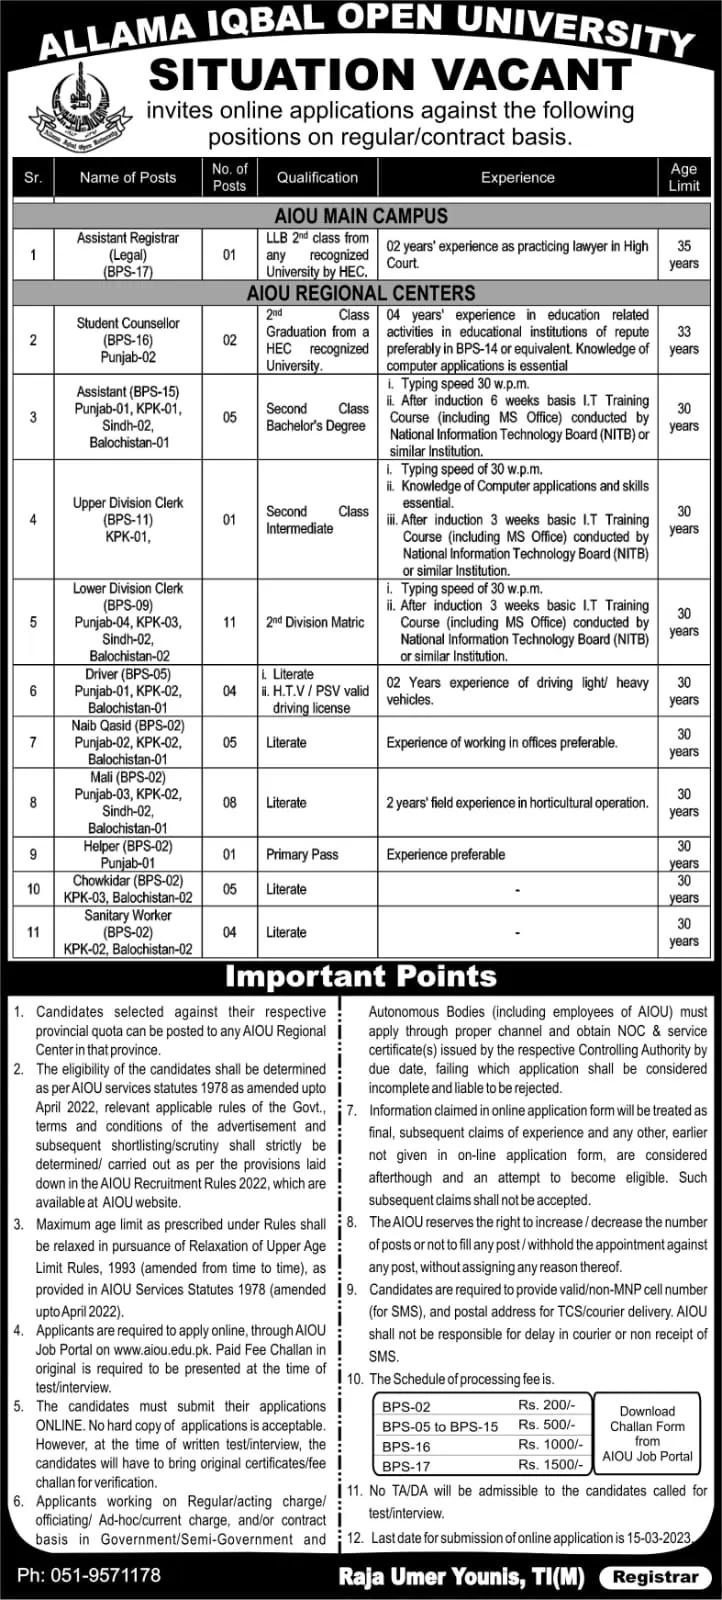 Counselor Jobs in AIOU March 2023